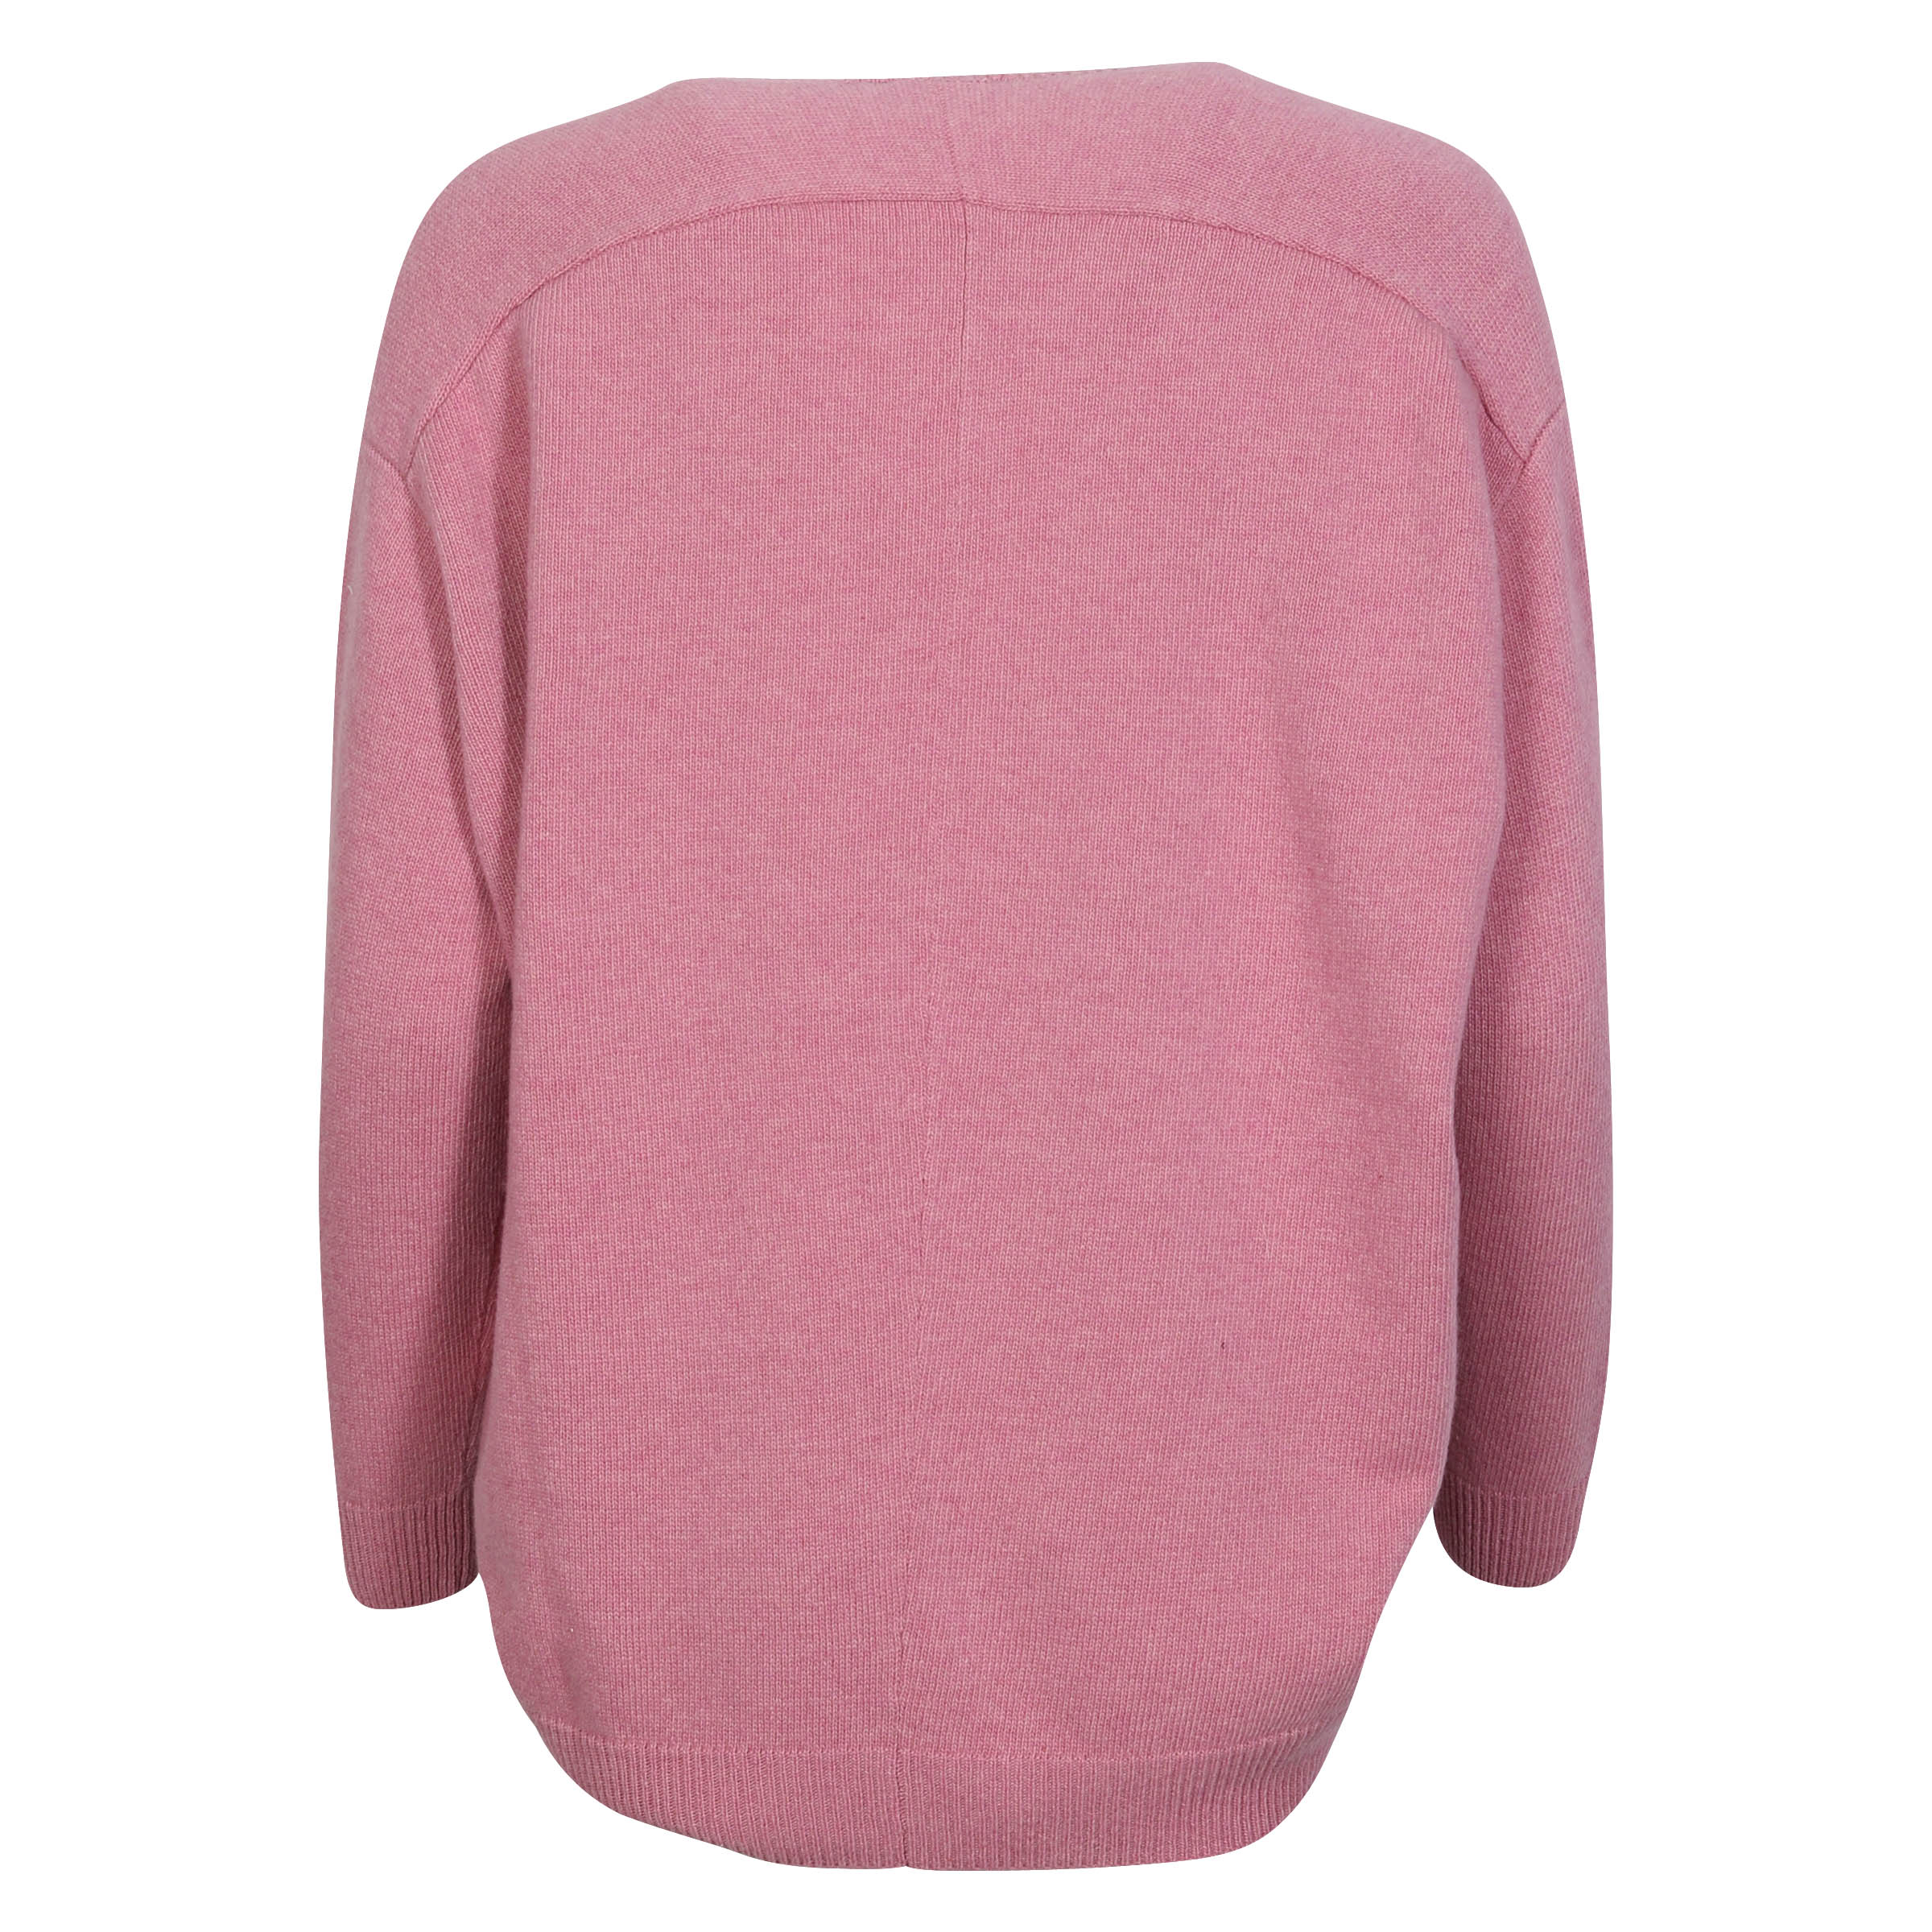 Avant Toi Knit Sweater in Pink